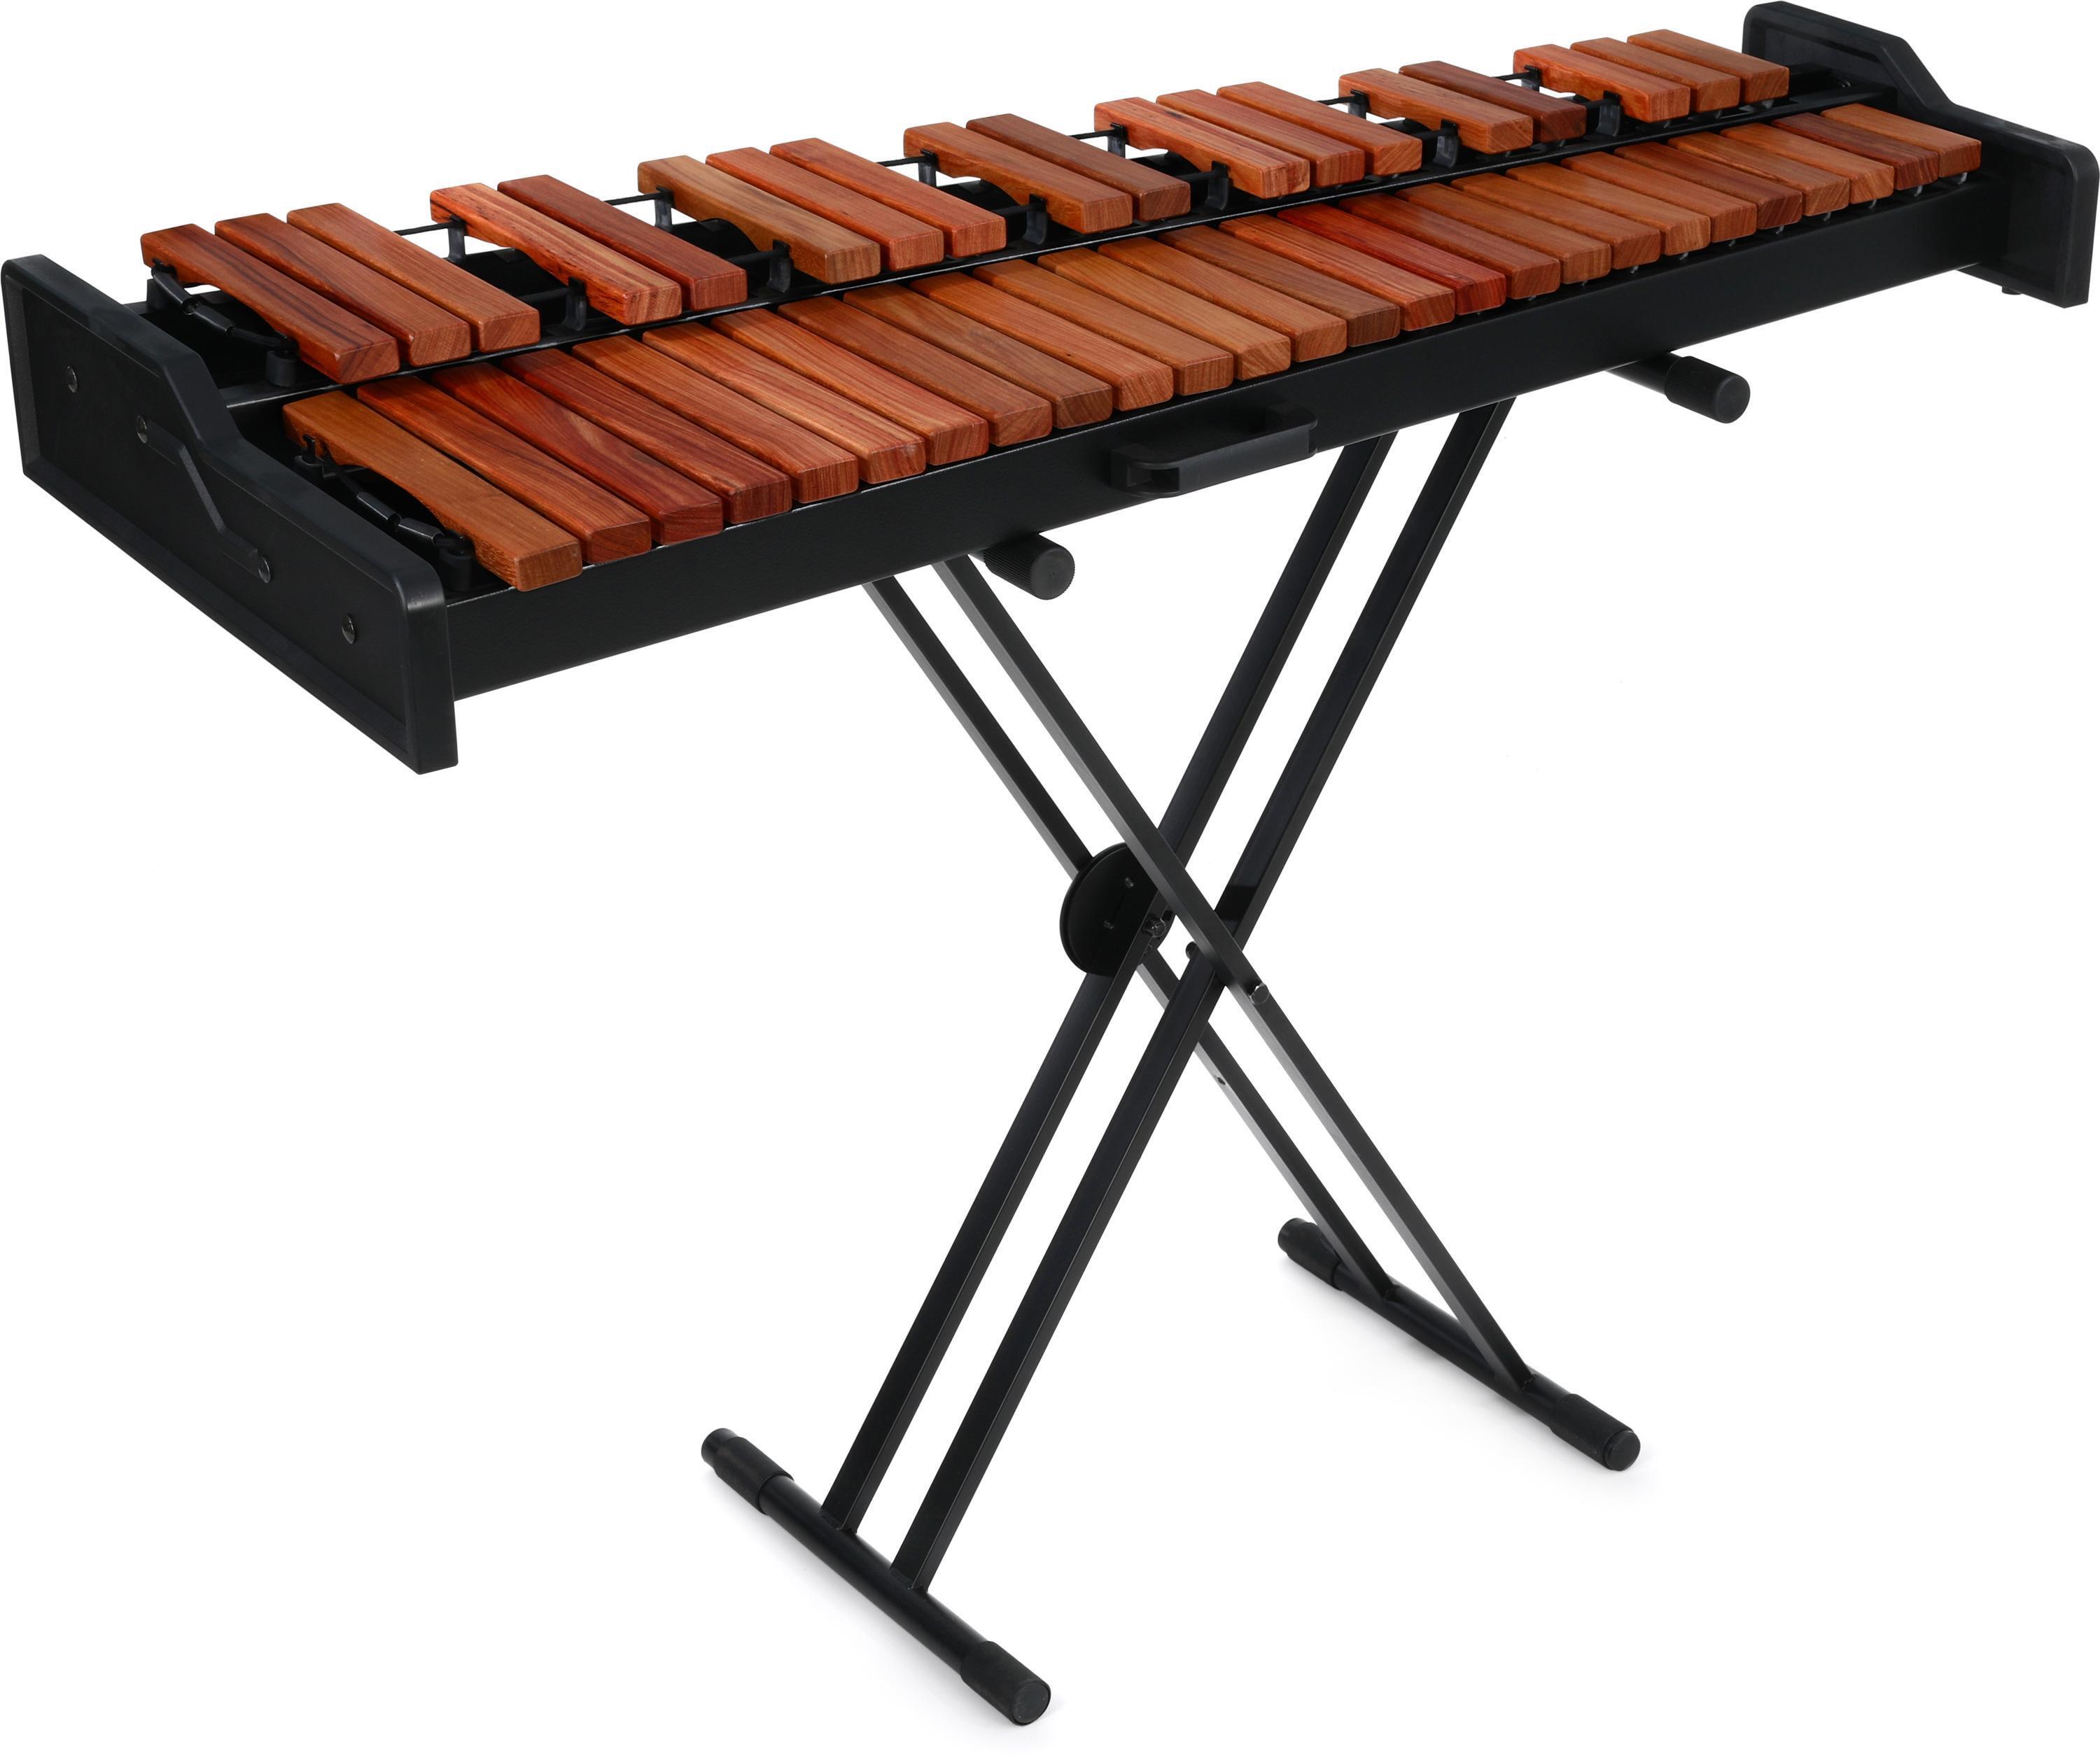 3.5-octave　Adams　Academy　Xylophone　Pau　Rosa　Sweetwater